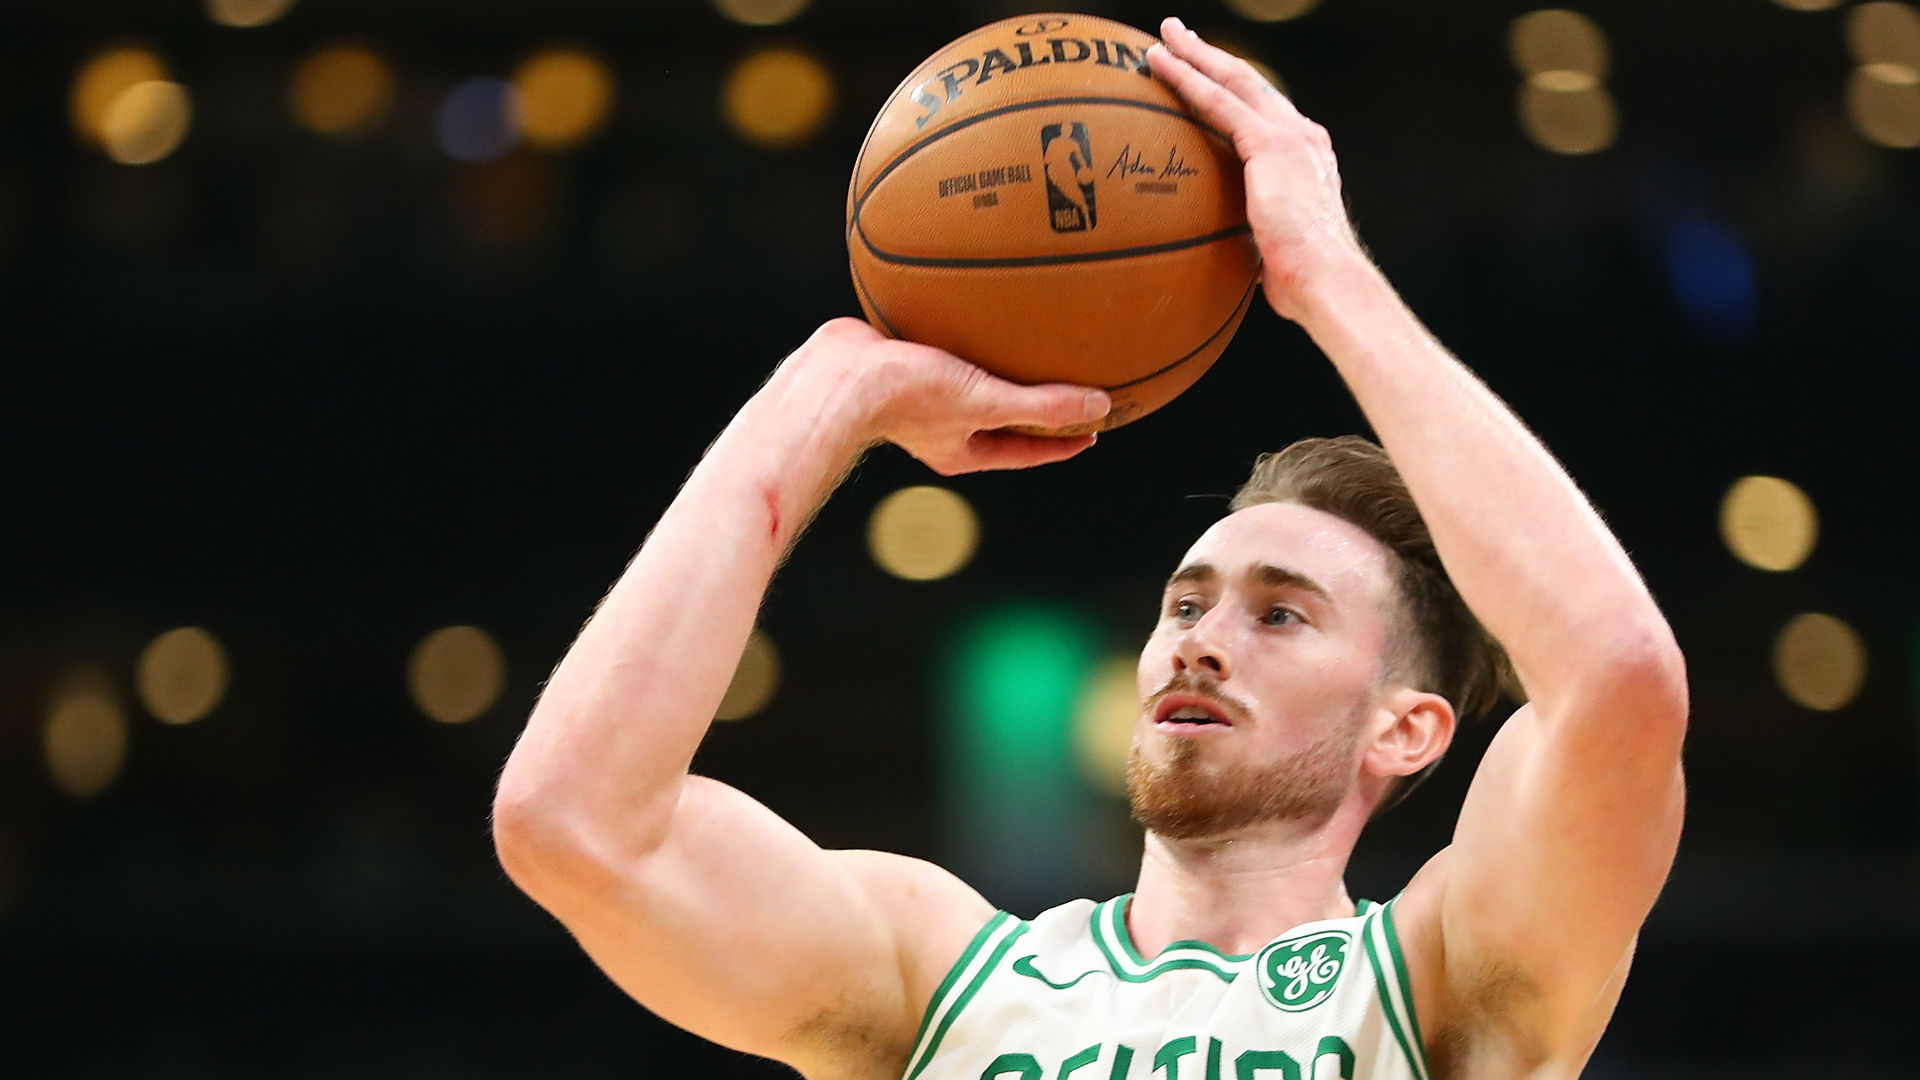 After making his return from a year out with injury, Gordon Hayward said: "It was amazing to be out there on the court again."